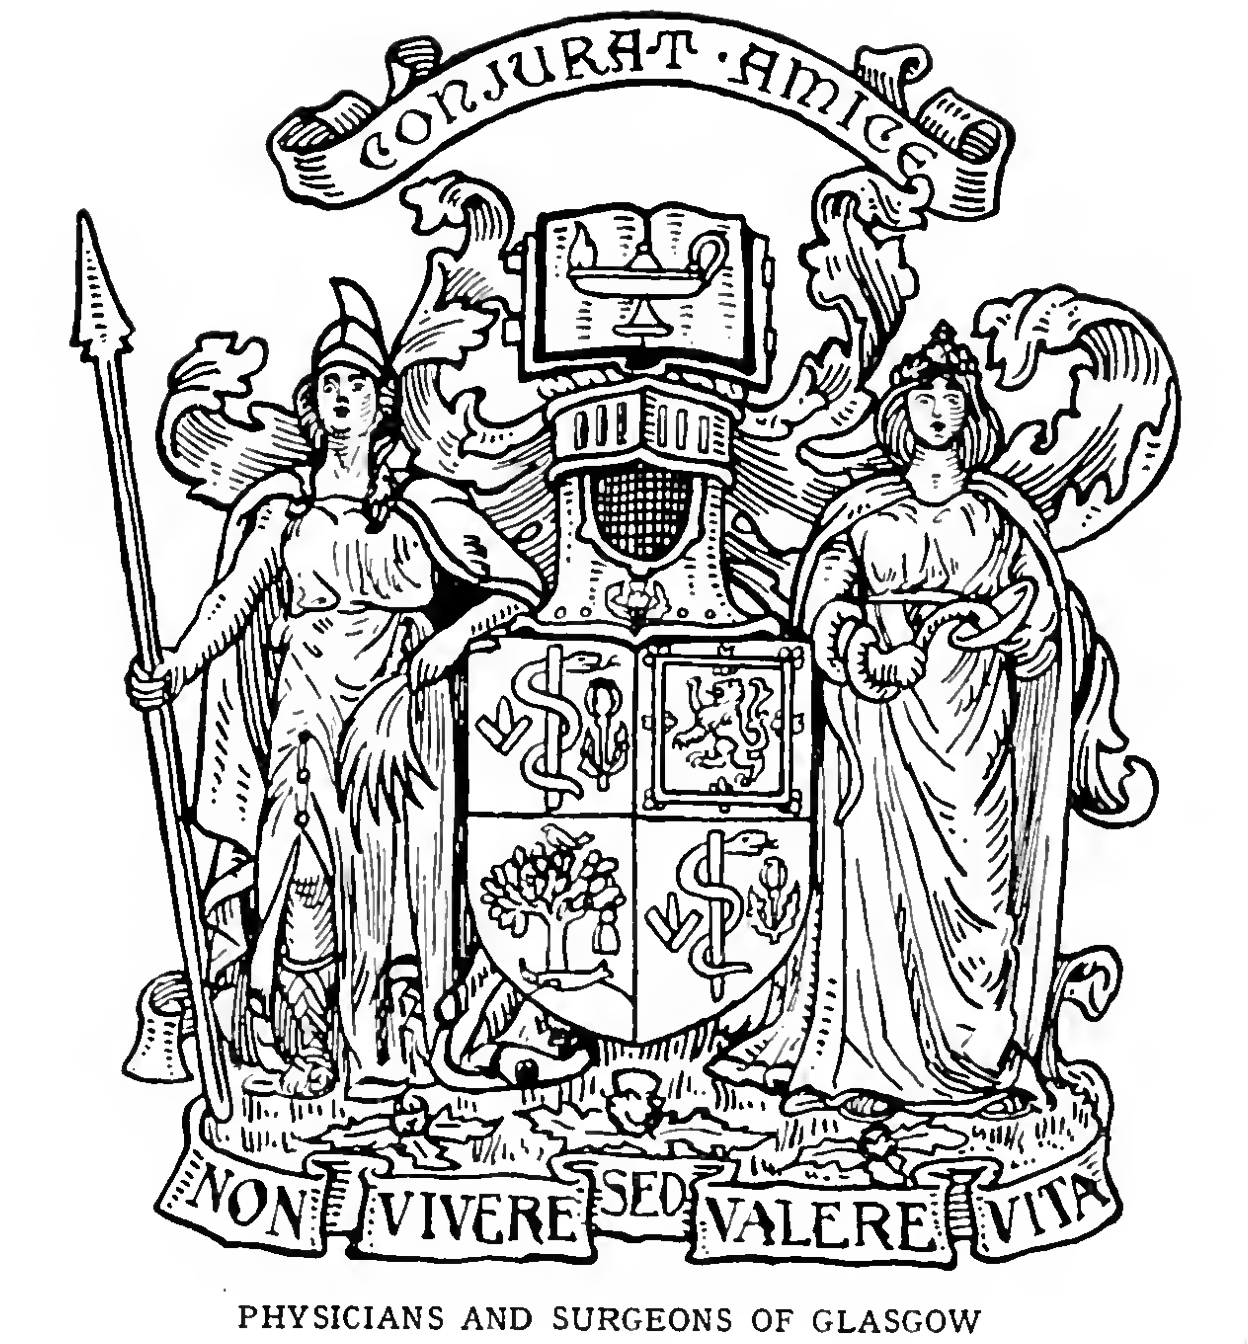 PHYSICIANS AND SURGEONS OF GLASGOW, Royal Faculty of.